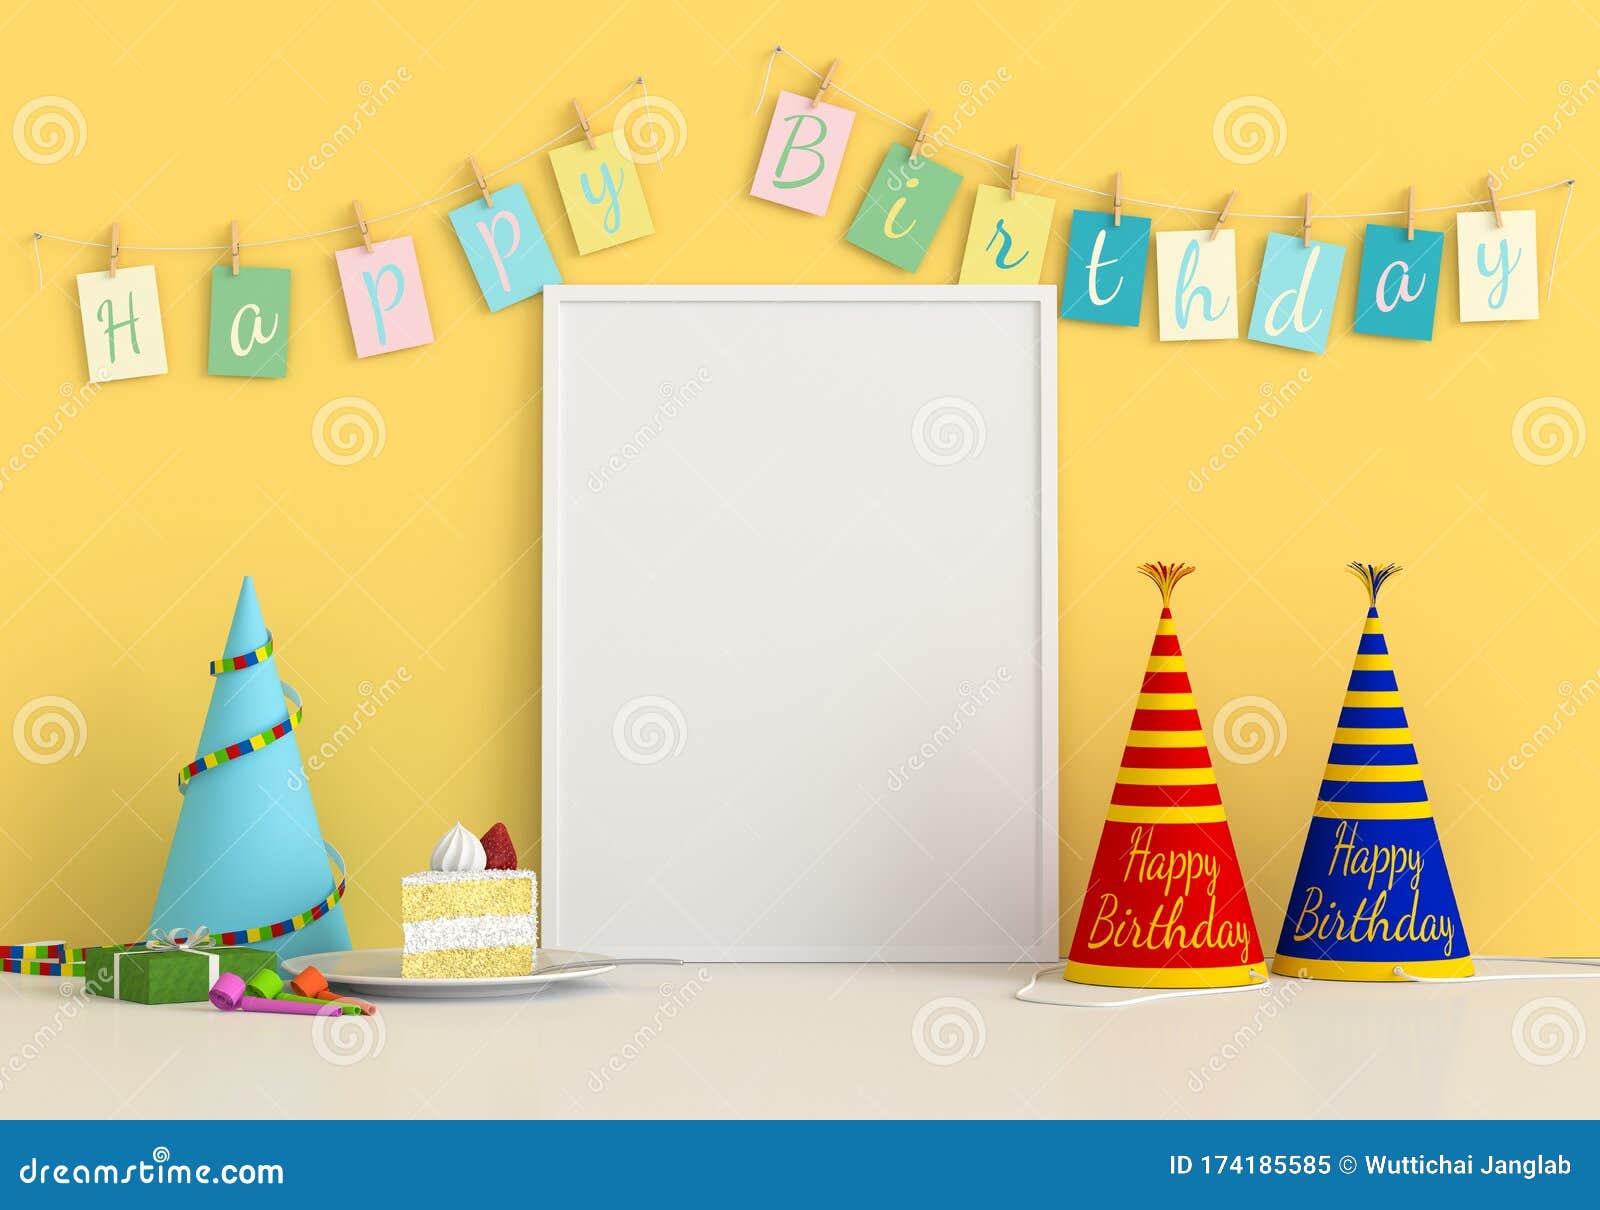 Download Blank Photo Frame For Mockup On Floor, Happy Birthday ...